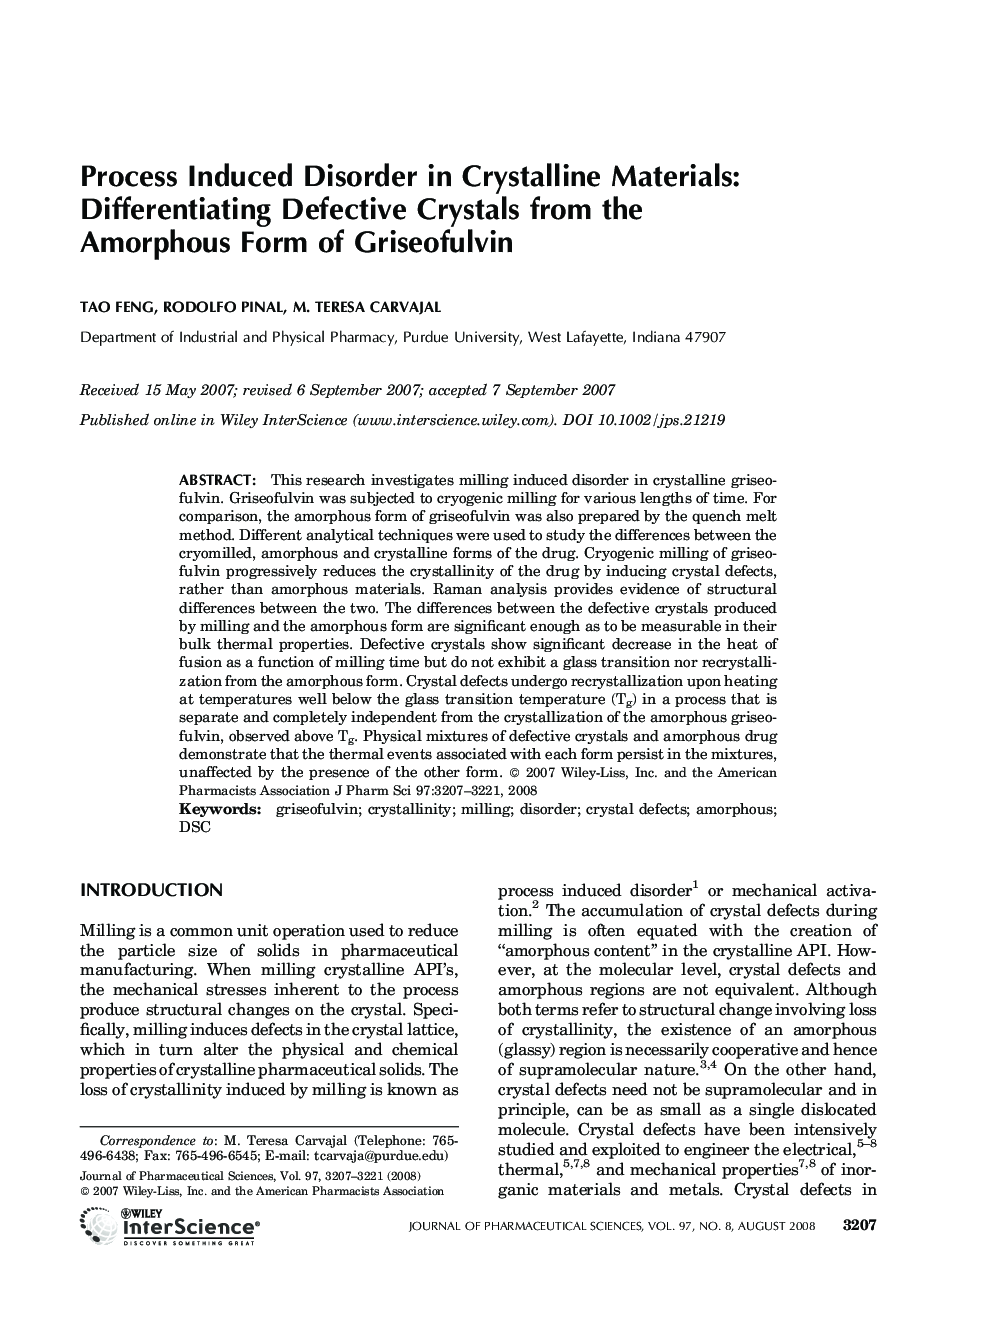 Process Induced Disorder in Crystalline Materials:Differentiating Defective Crystals from the Amorphous Form of Griseofulvin